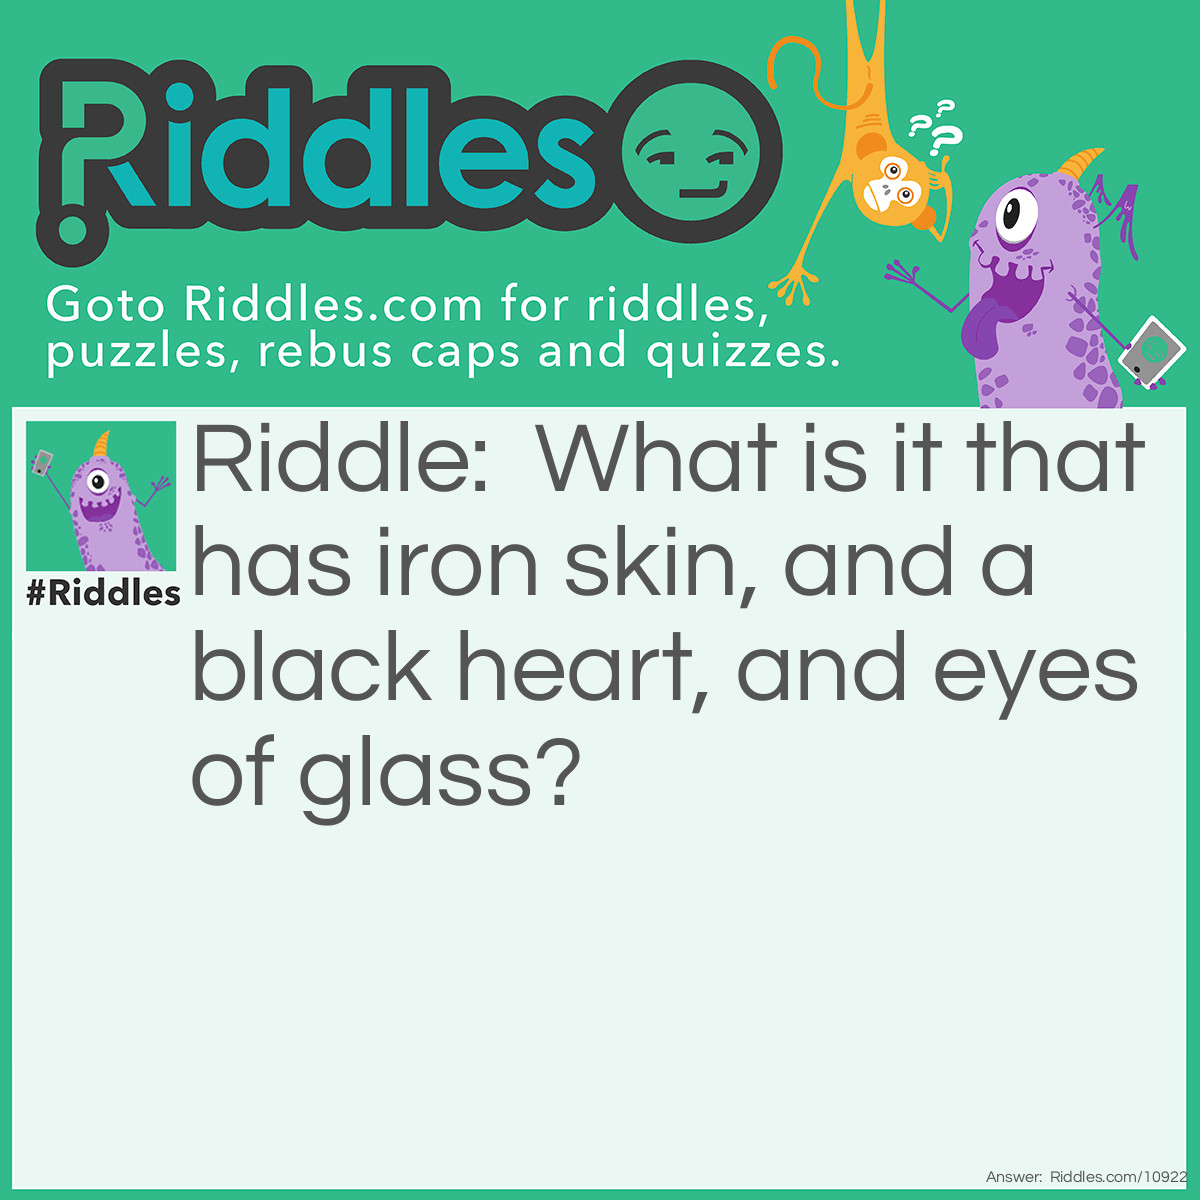 Riddle: What is it that has iron skin, and a black heart, and eyes of glass? Answer: An aeroplane.